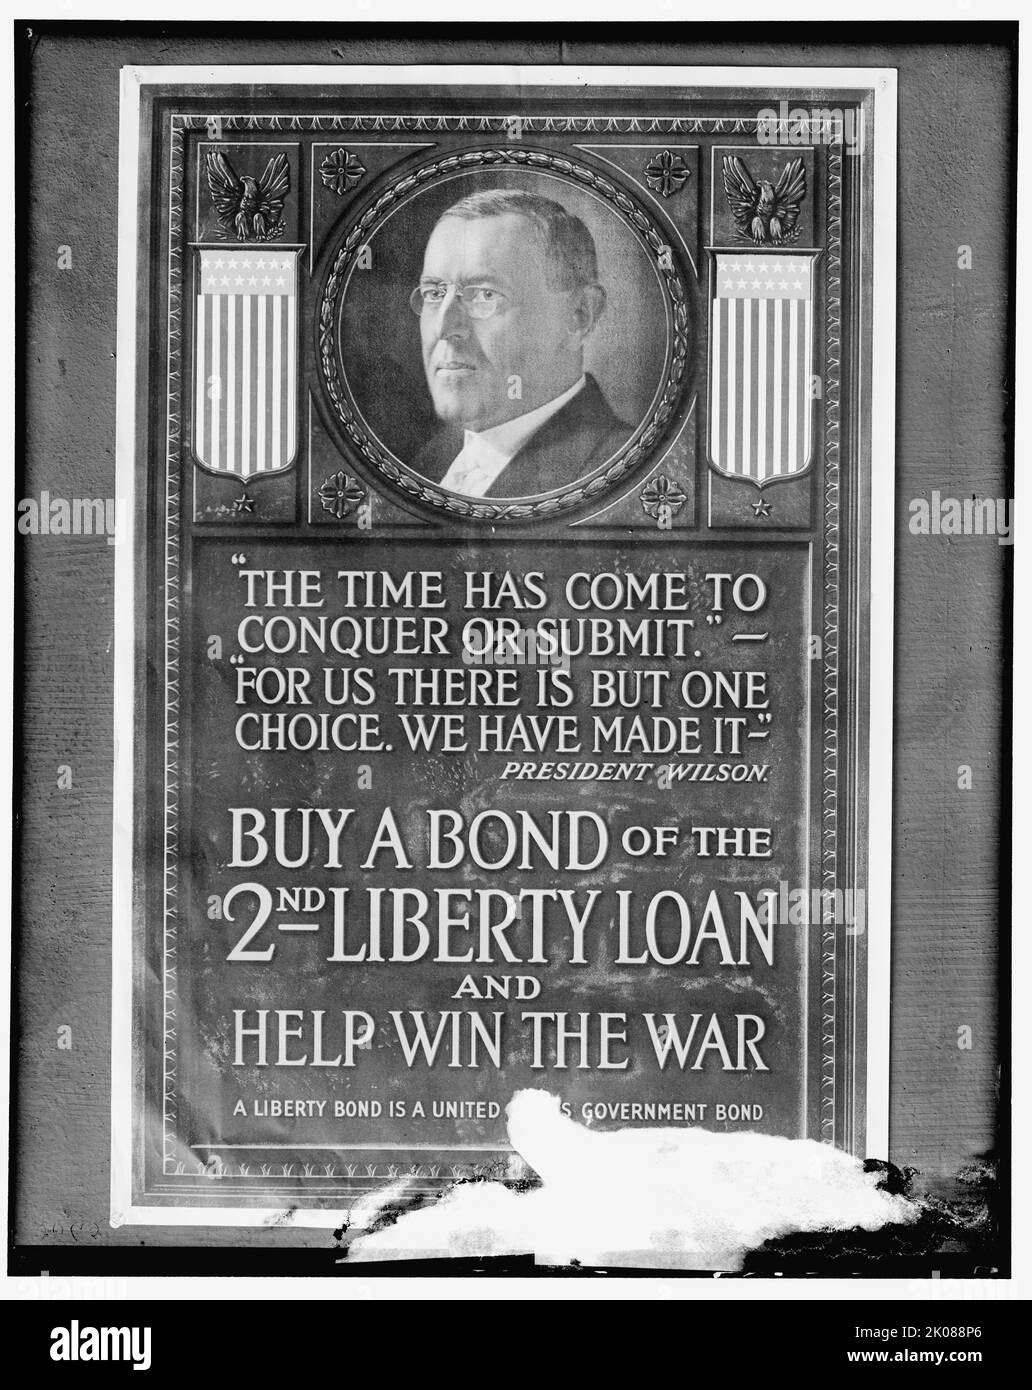 Liberty Loan poster, between 1914 and 1918. First World War poster with portrait of US President Woodrow Wilson: '&quot;The time has come to conquer or submit. For us there is but one choice. We have made it&quot;. Buy a Bond of the 2nd Liberty Loan and Help Win the War; a Liberty Bond is a United States Government Bond'. Stock Photo